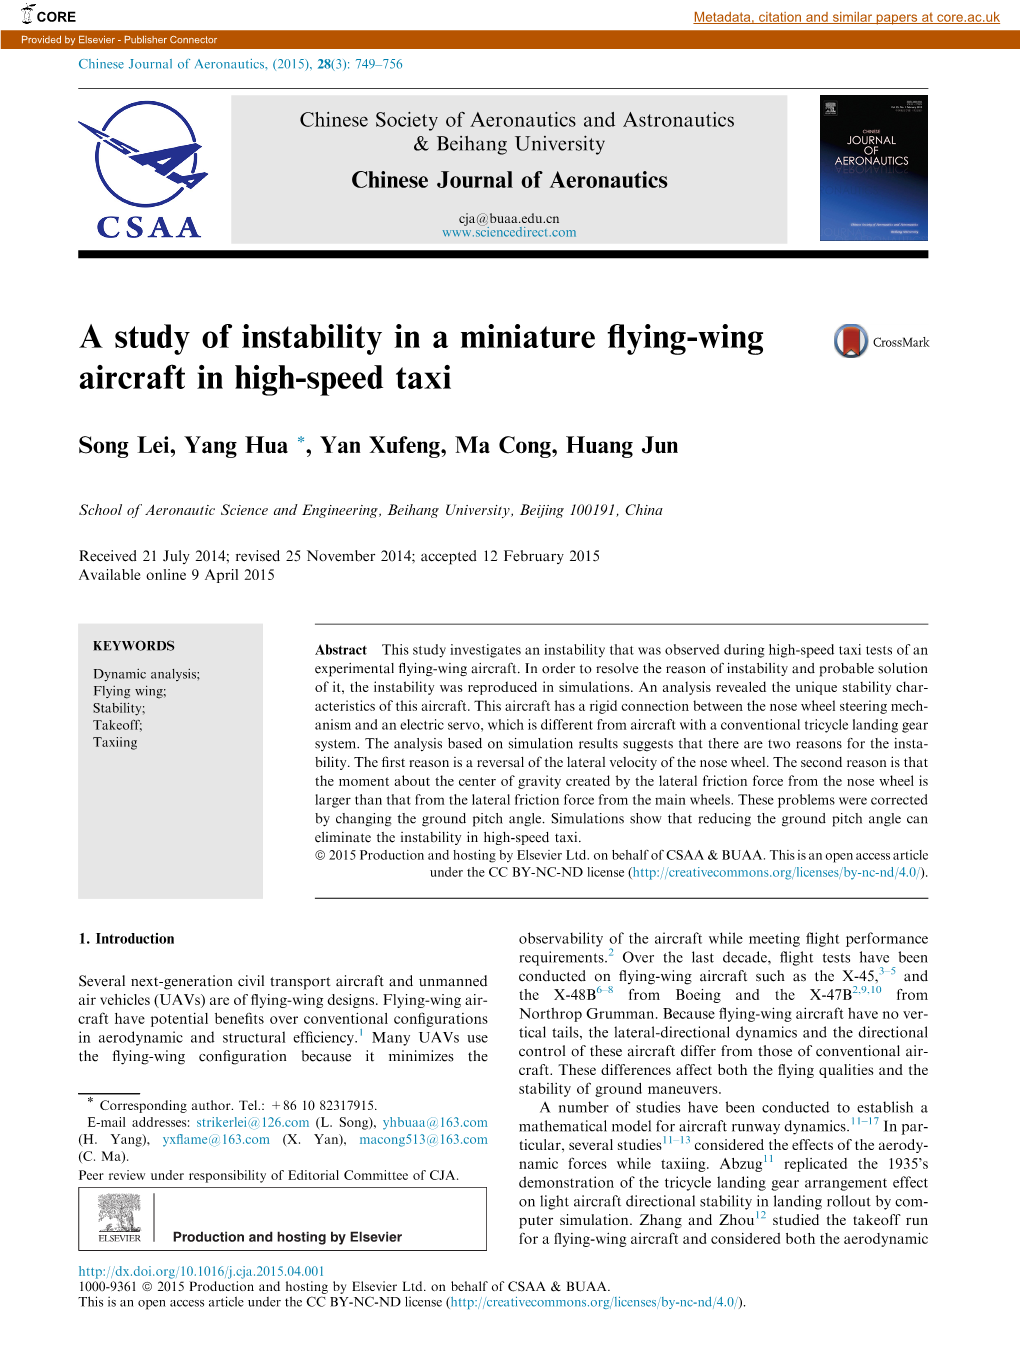 A Study of Instability in a Miniature Flying-Wing Aircraft in High